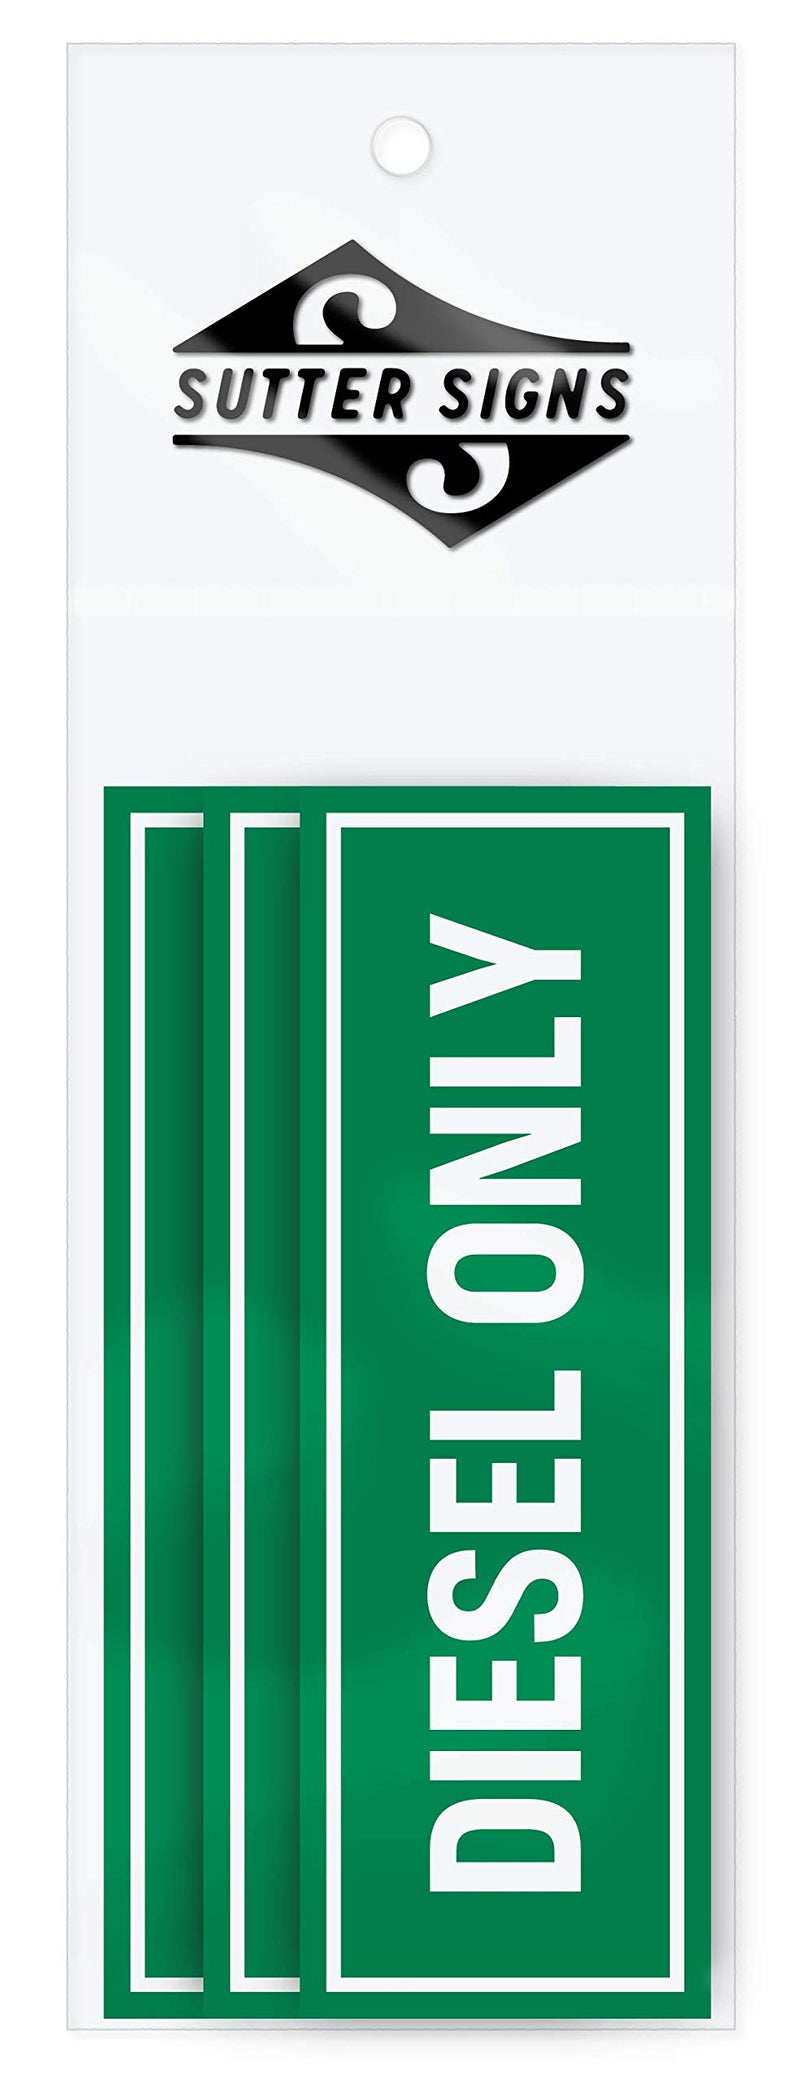  [AUSTRALIA] - Diesel Only Sticker Sign (Pack of 3) | Adhesive Fuel Decal for Trucks, Tractors, Machinery and Equipment